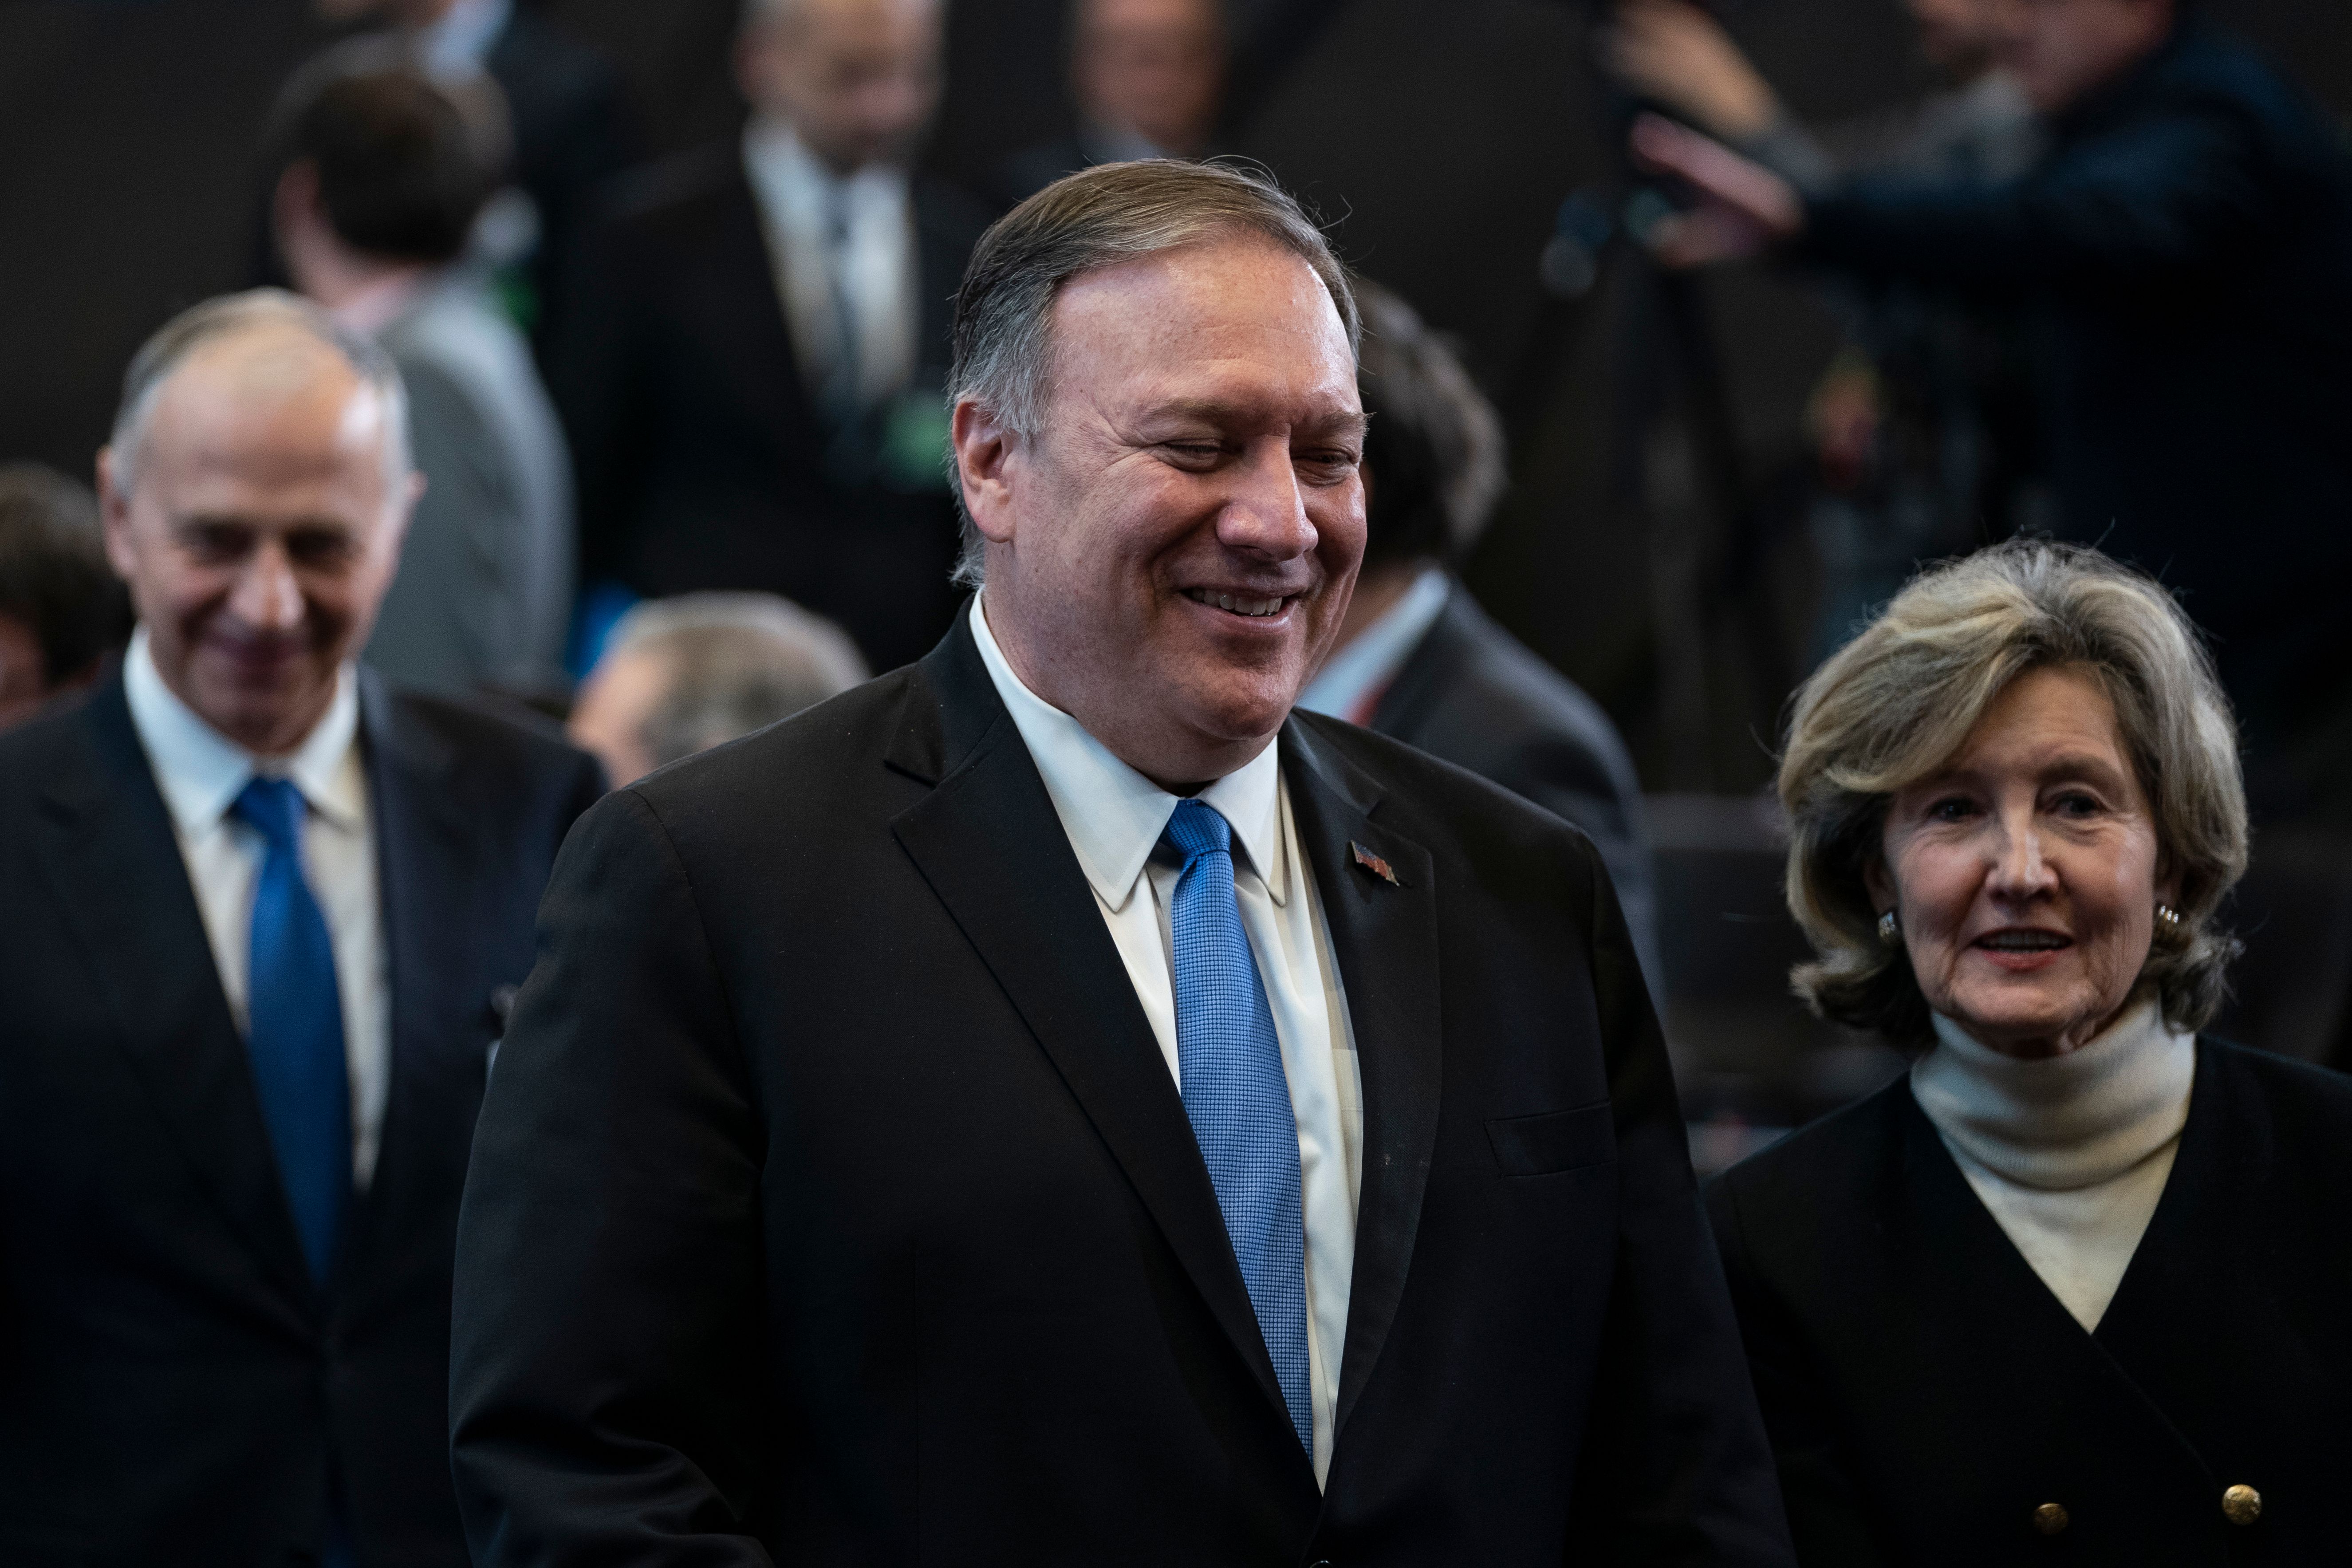 US Secretary of State Mike Pompeo (C) arrives for a NATO Foreign Affairs ministers' summit in Brussels on Nov. 20.